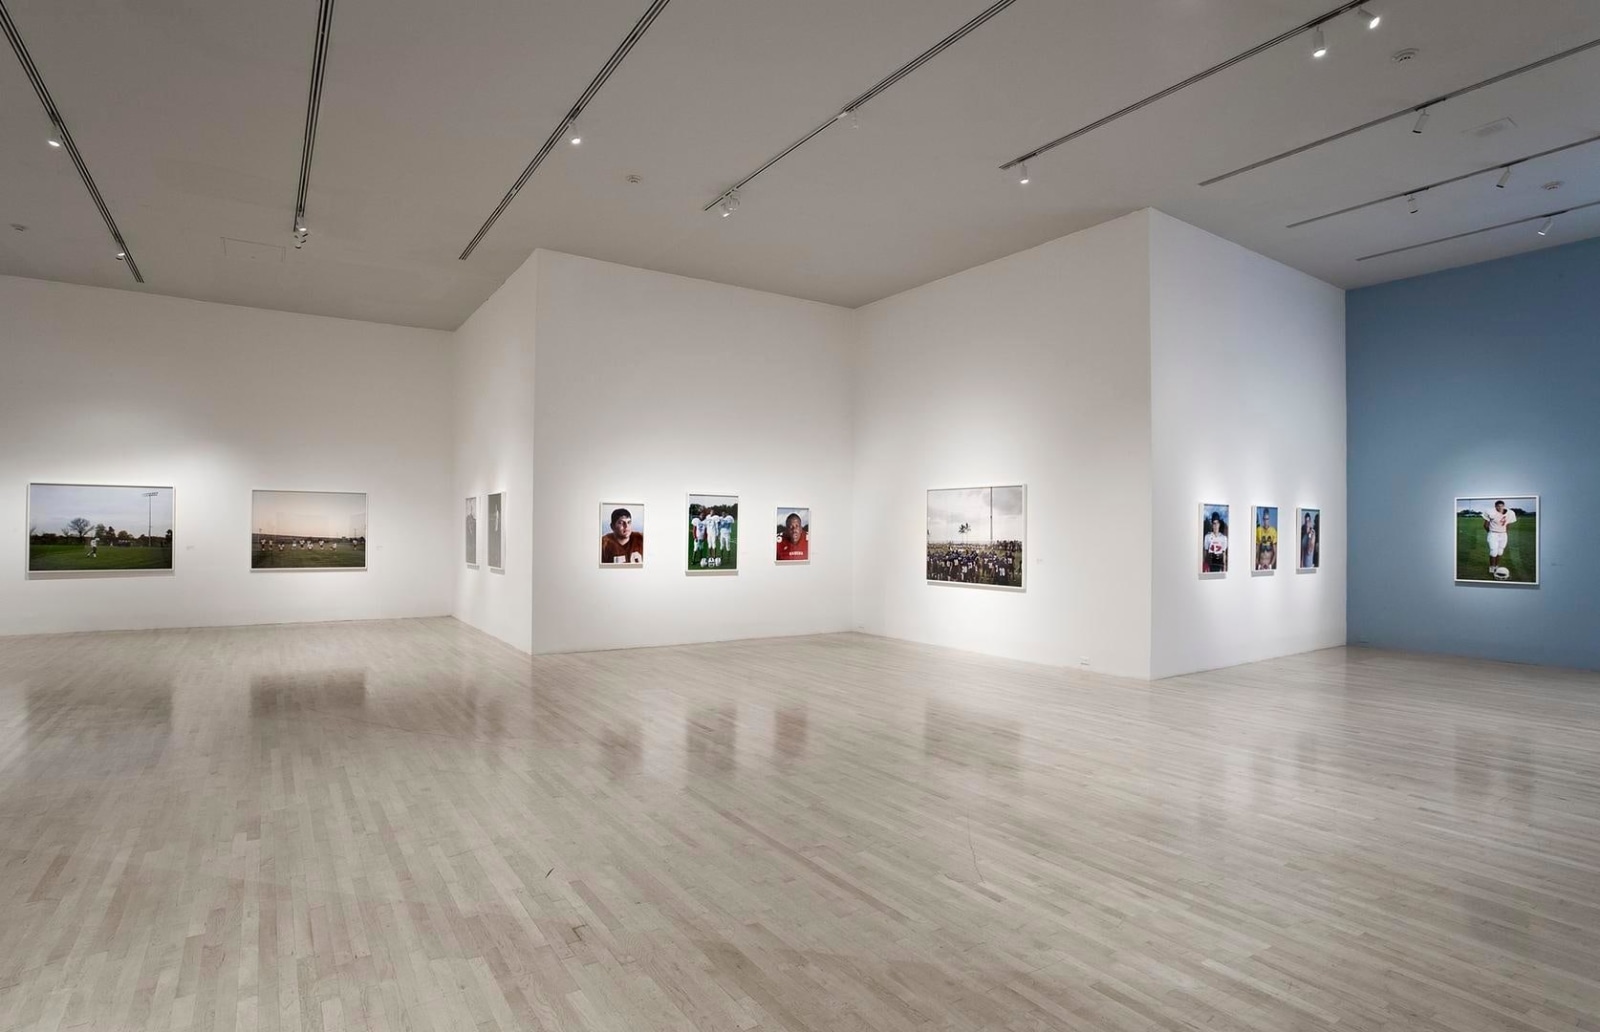  Installation view of Catherine Opie:&nbsp;Figure and Landscape&nbsp;at the Los Angeles County Museum of Art, Los Angeles